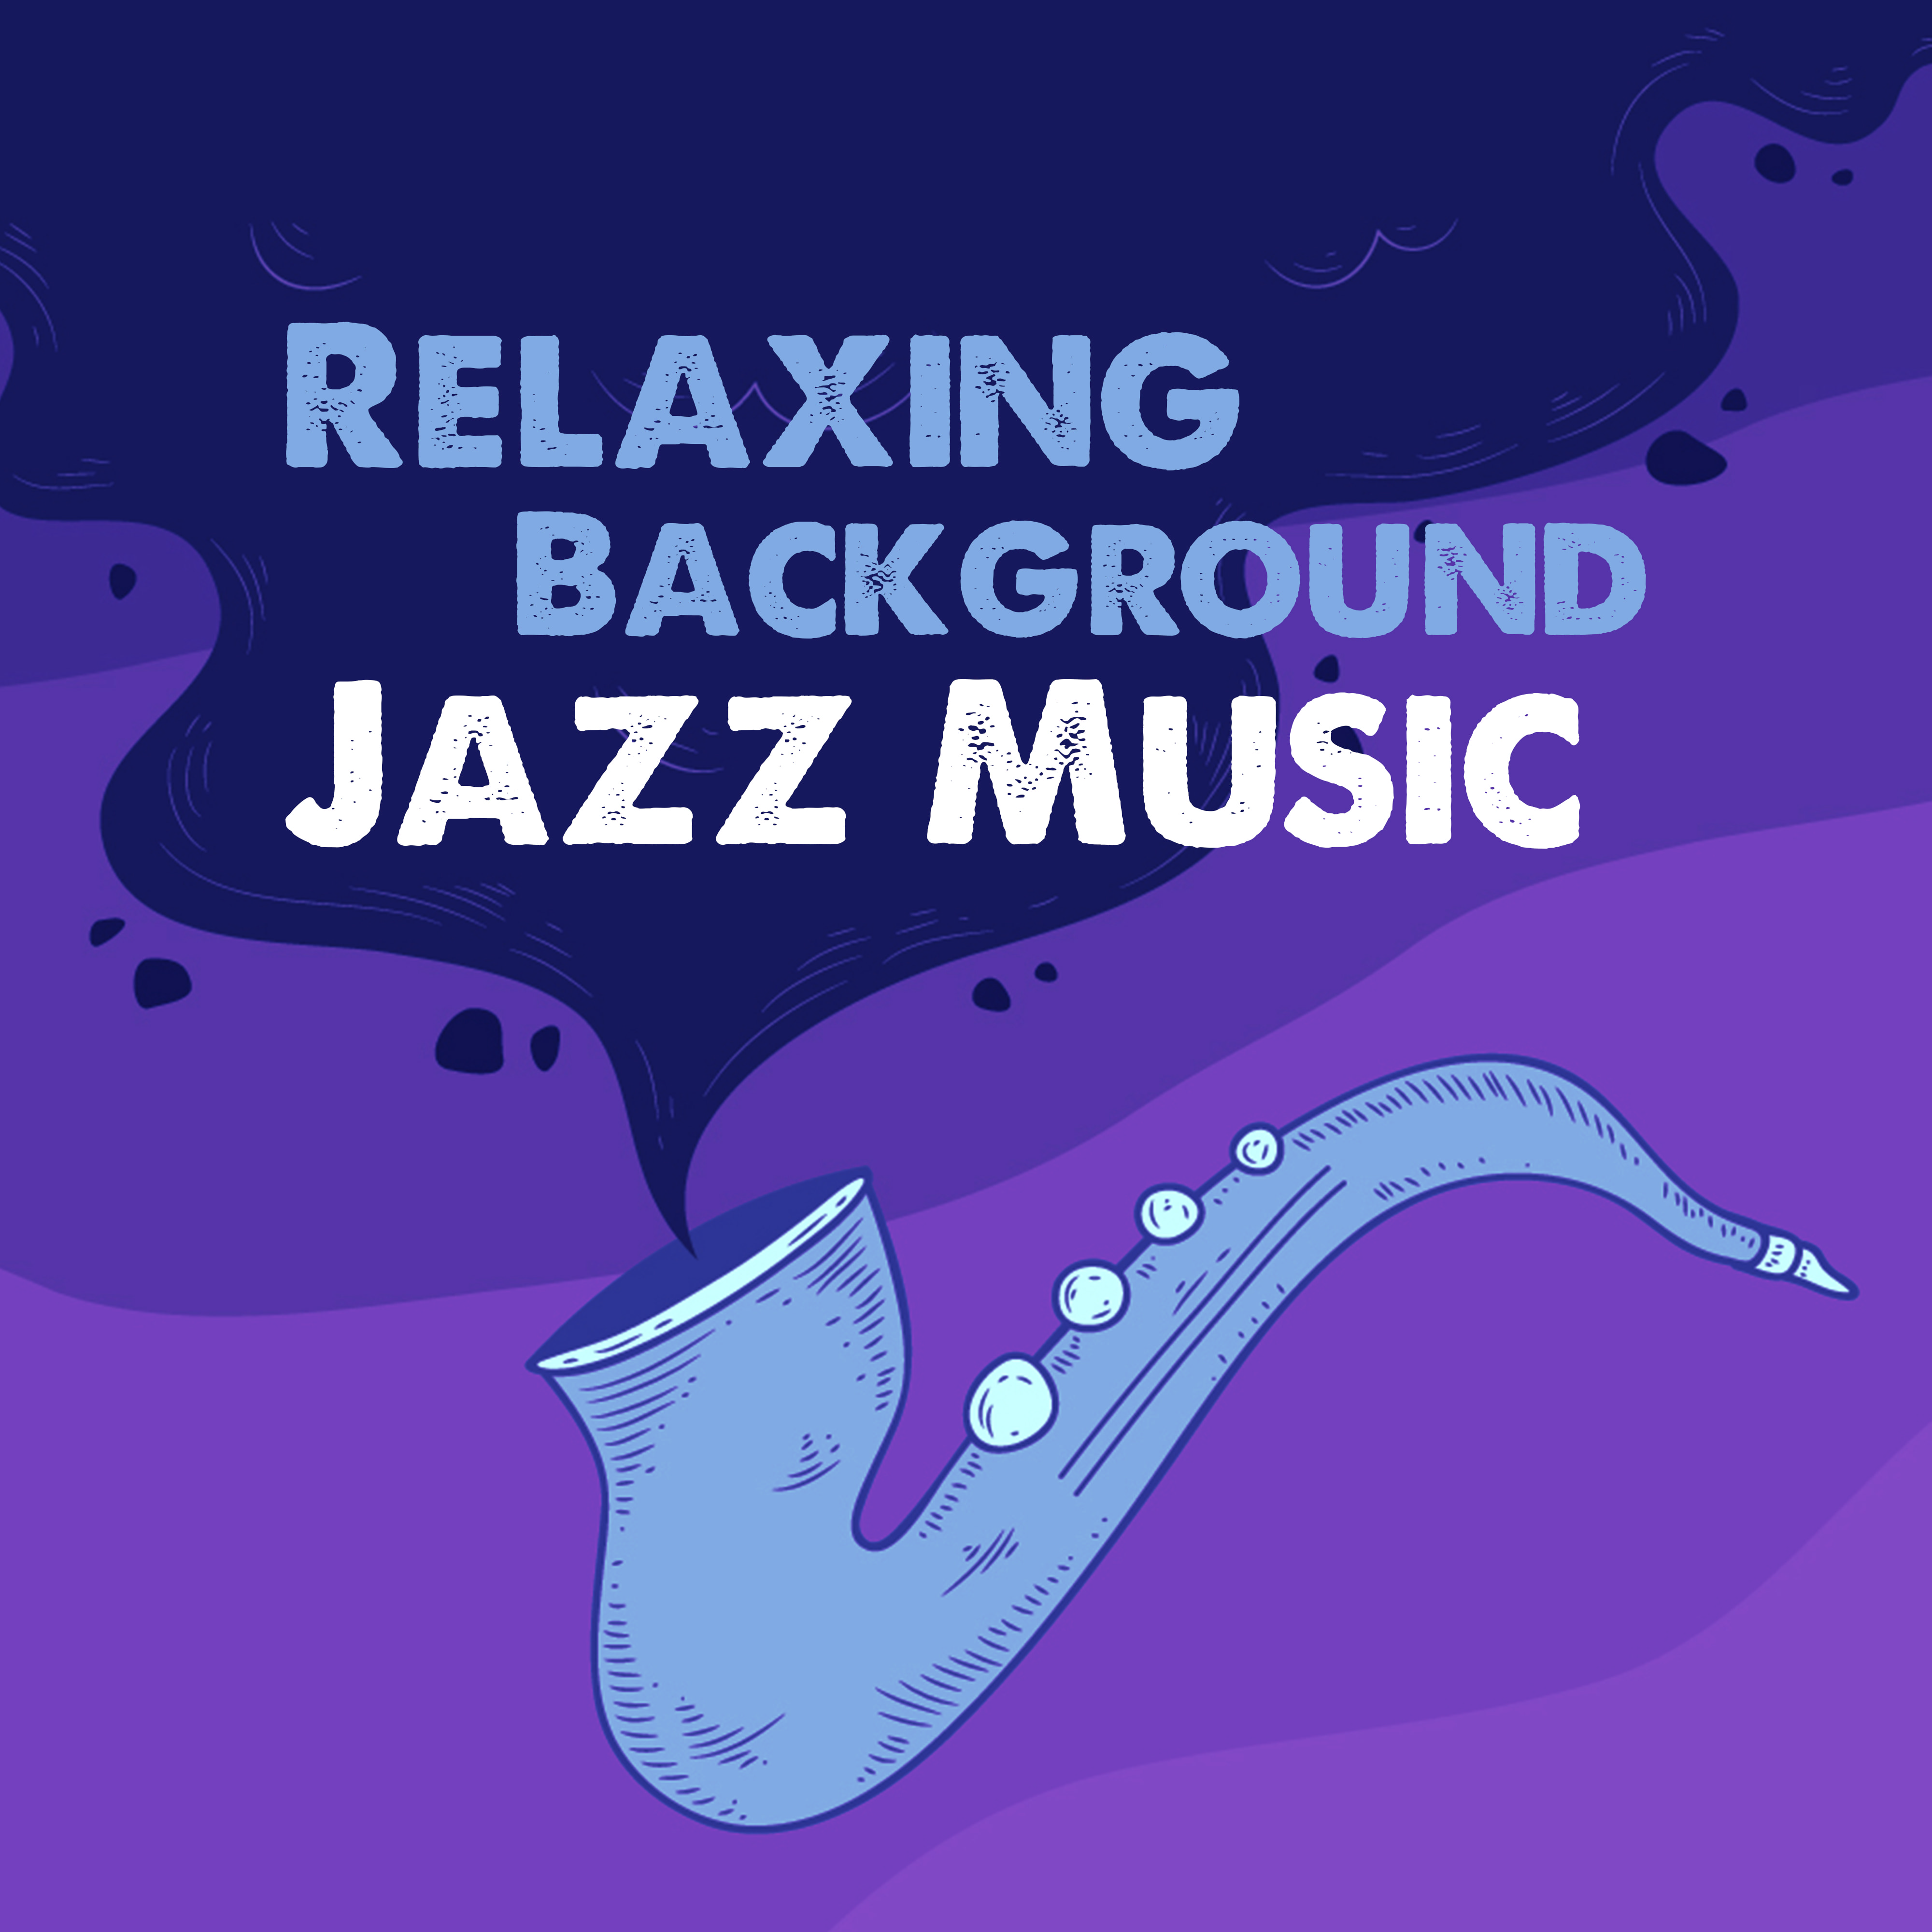 Relaxing Background Jazz Music